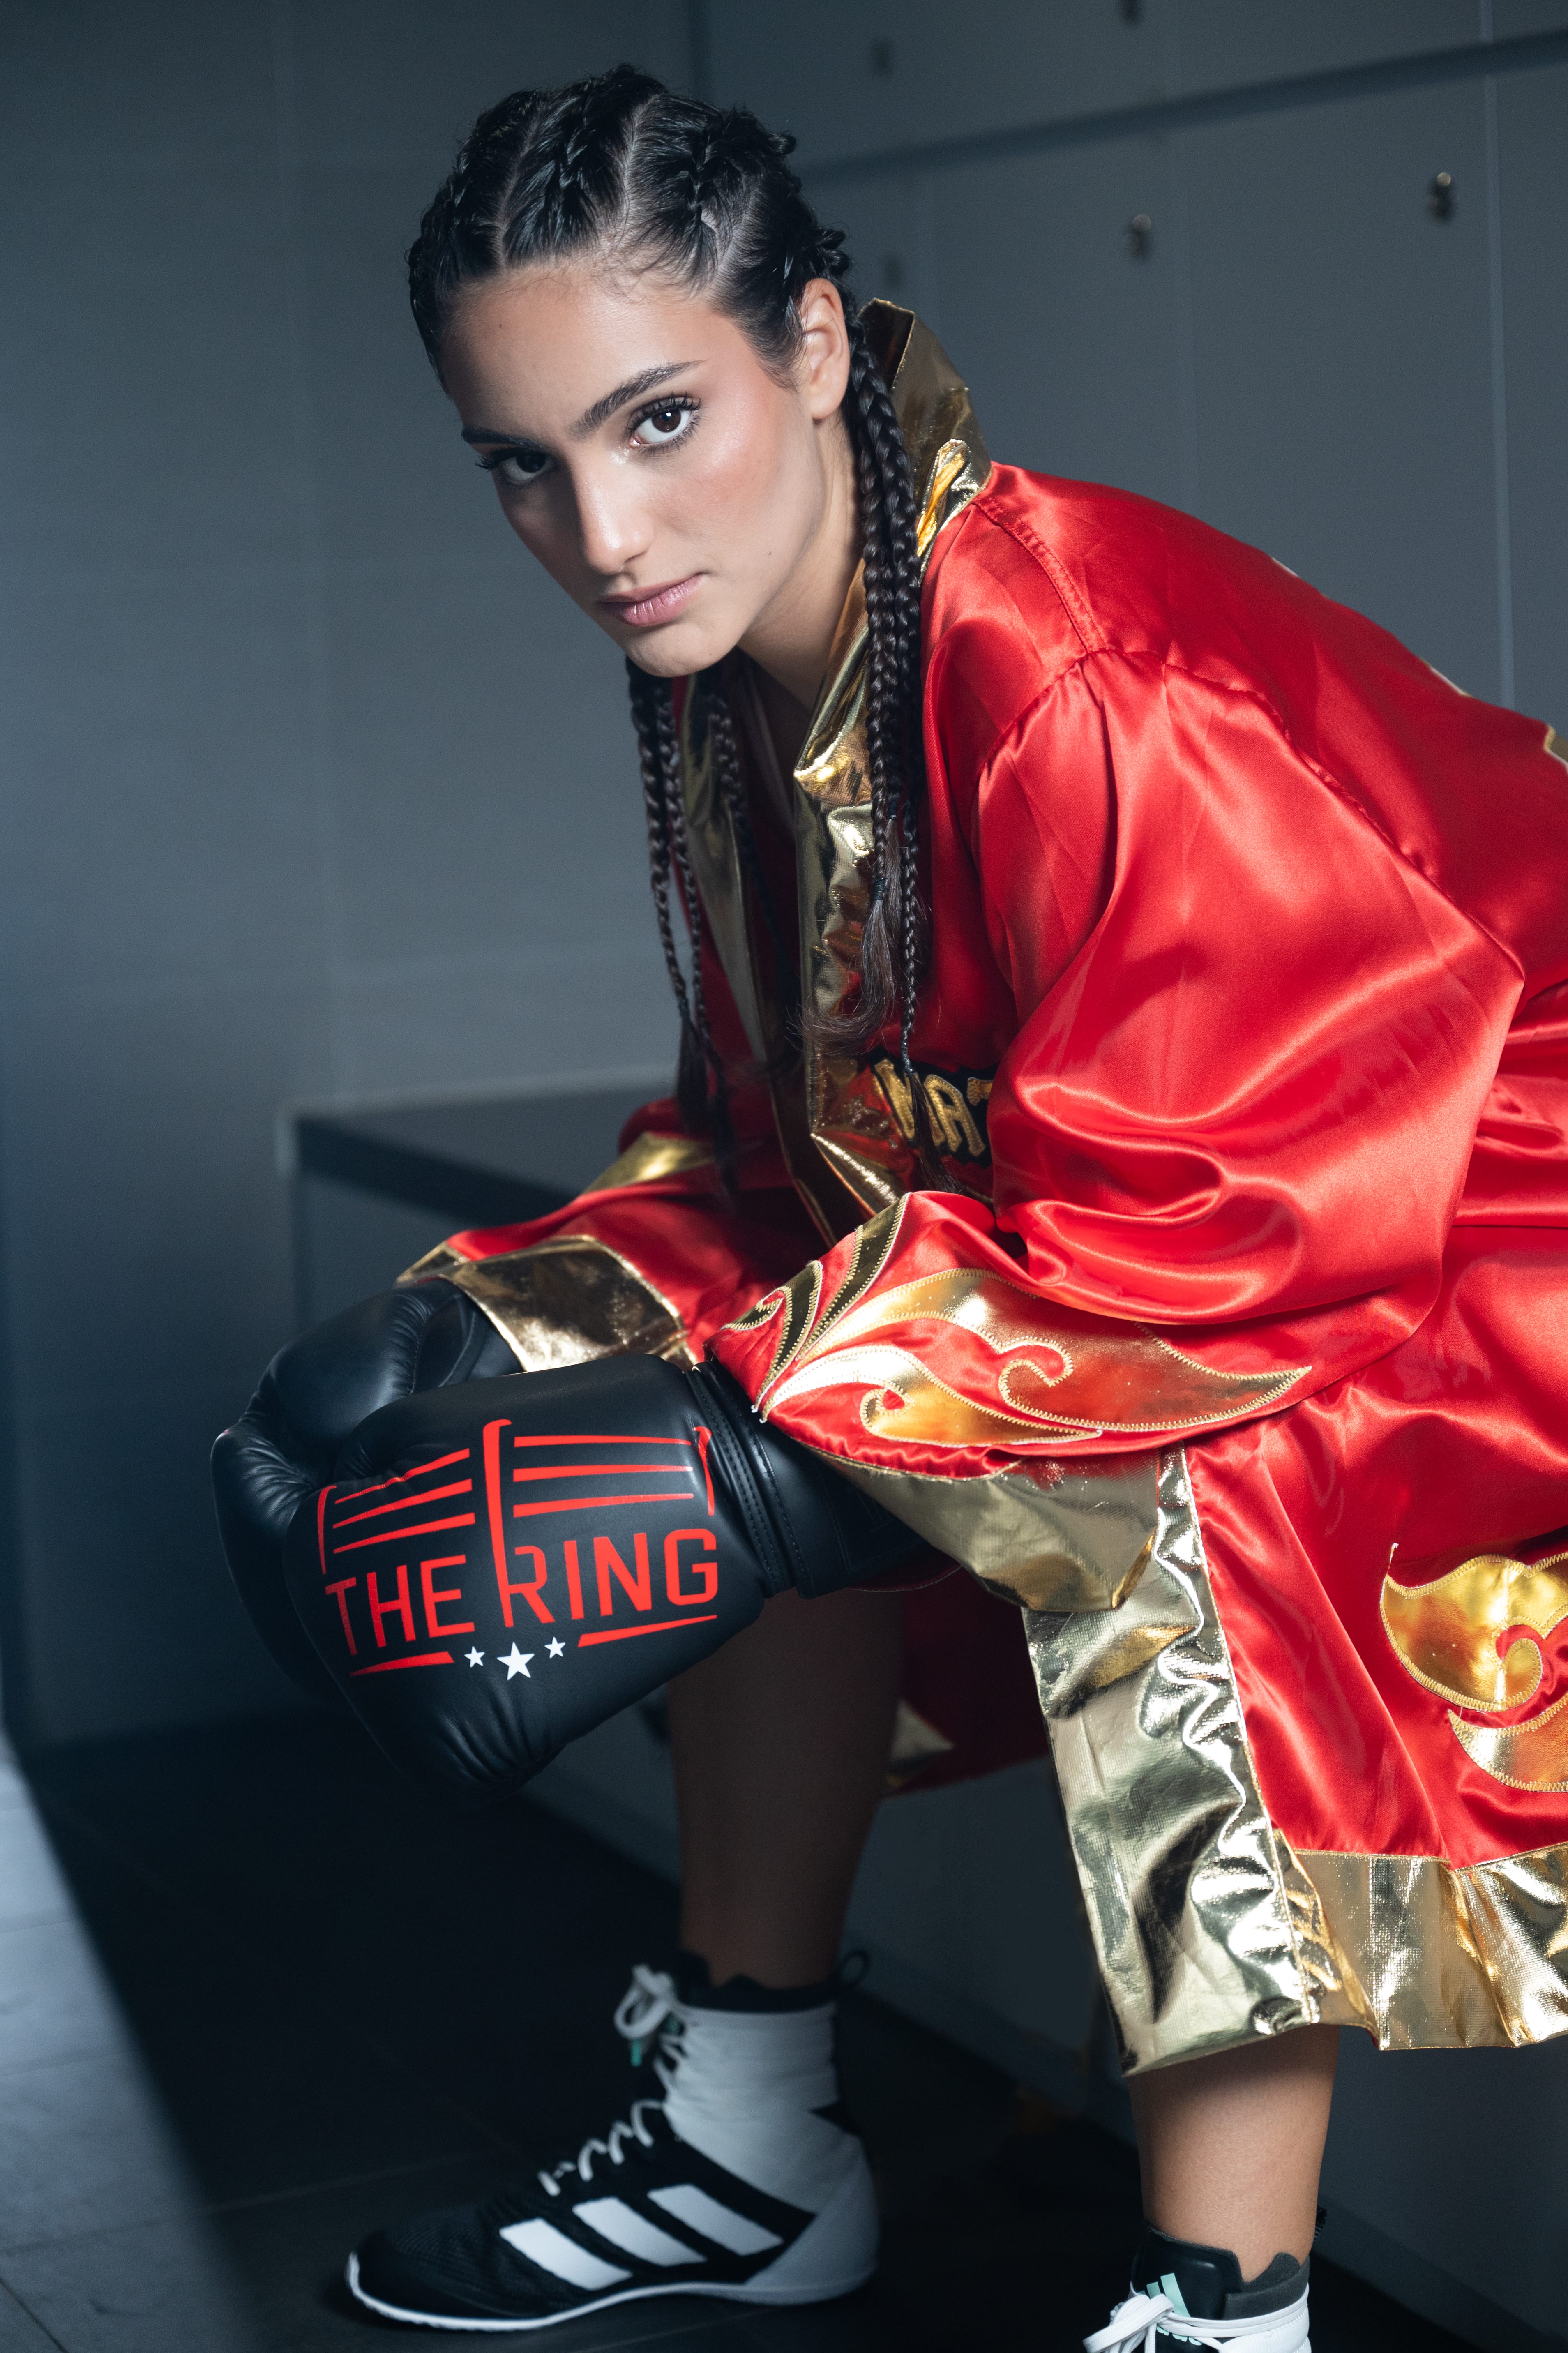 From Depression To Victory: Boxing Metaphor Takes Center Stage In 10-Million Streamer Matilde G’s New Mental Health Anthem ‘Fighter'”